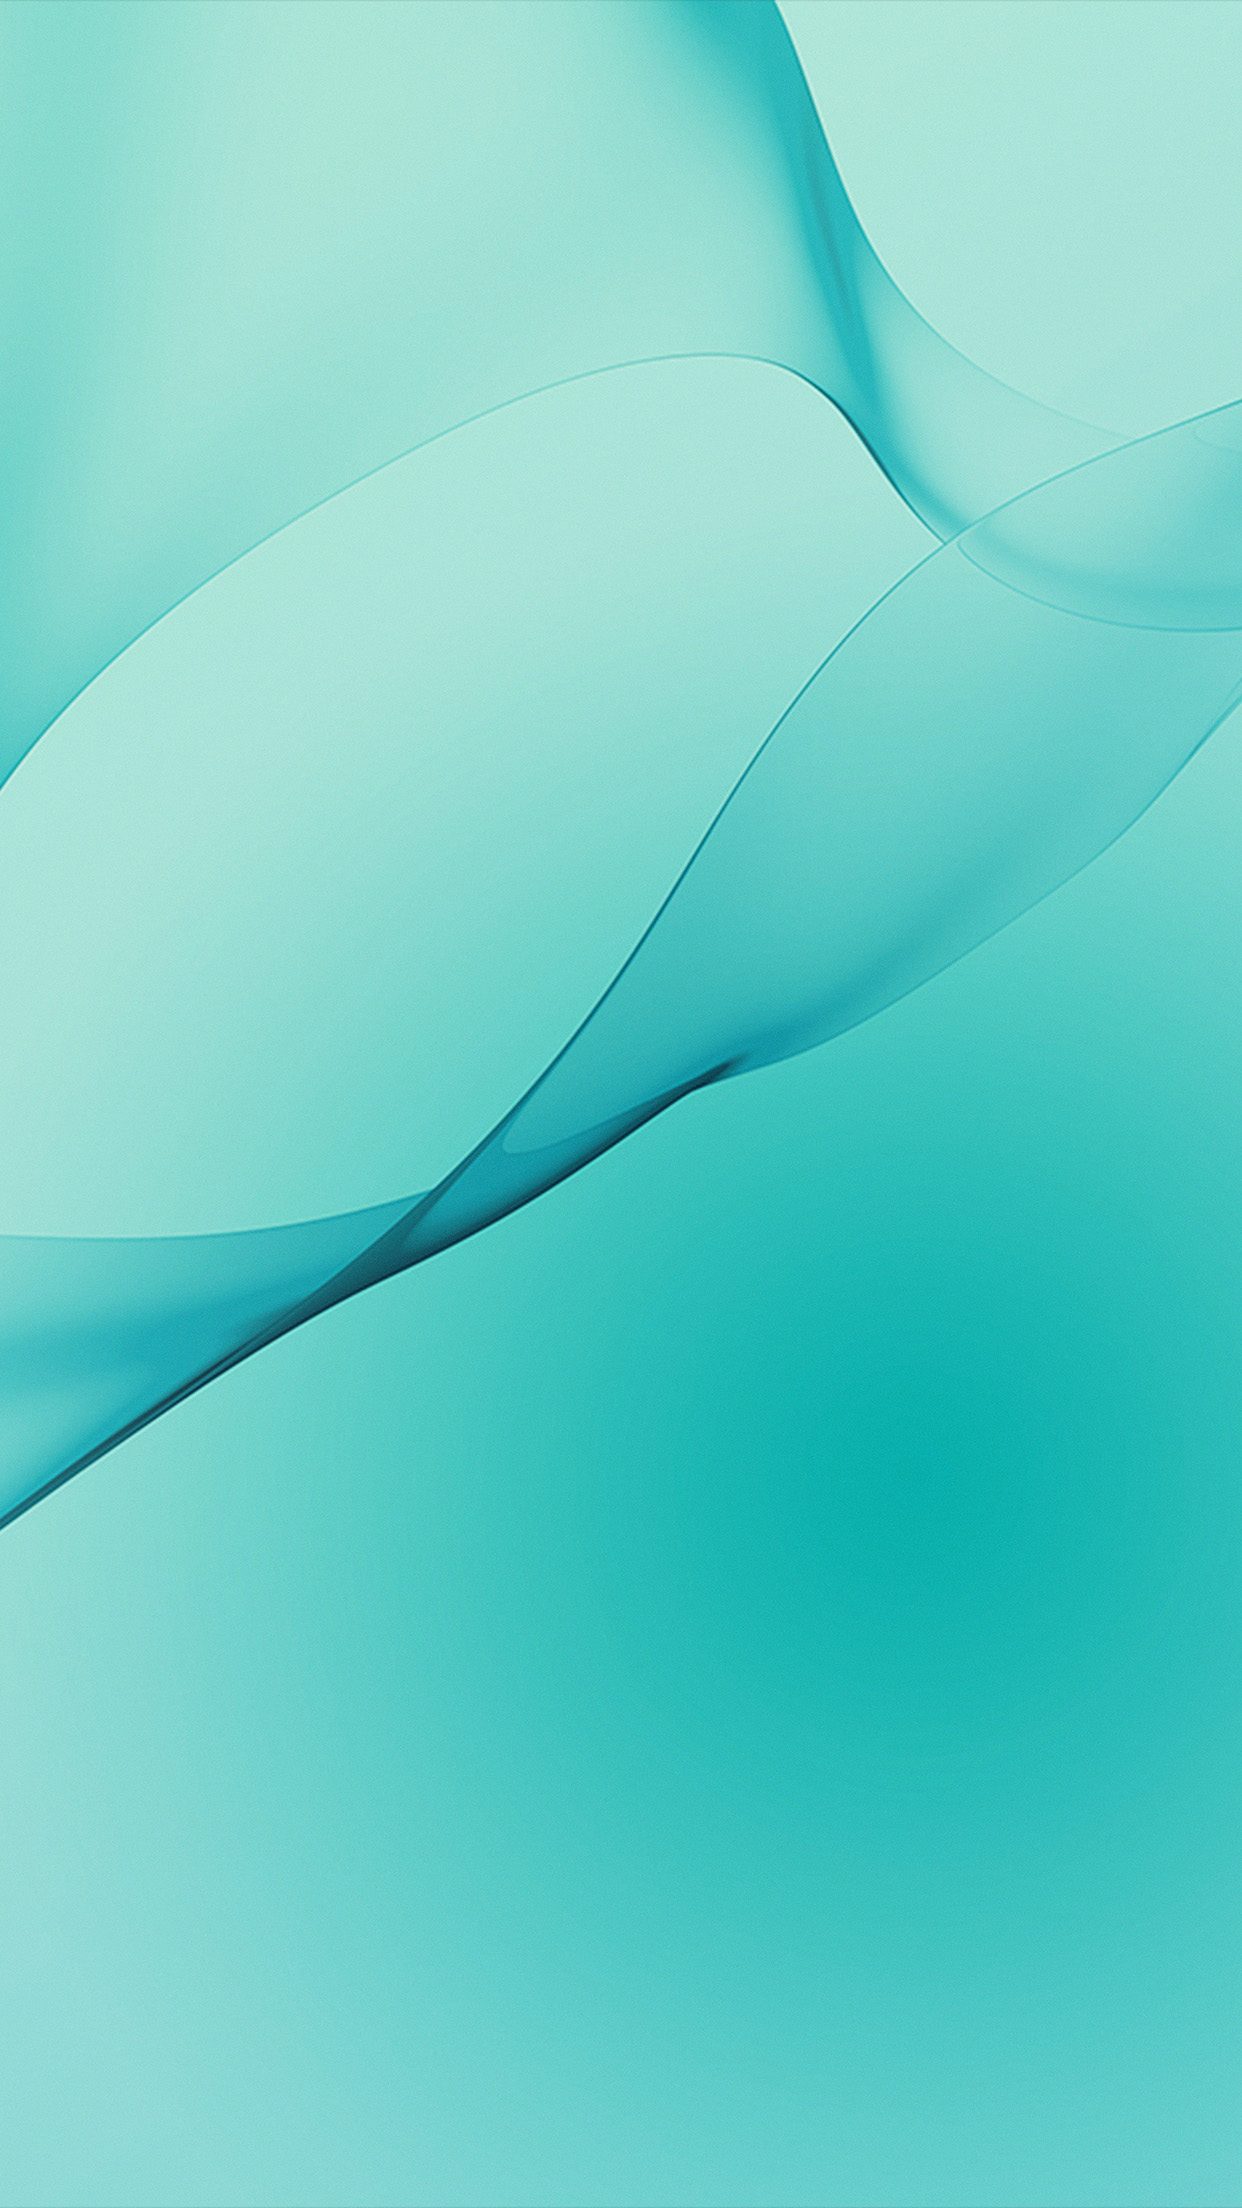 Abstract Blue White Rhytm Pattern Android wallpaper